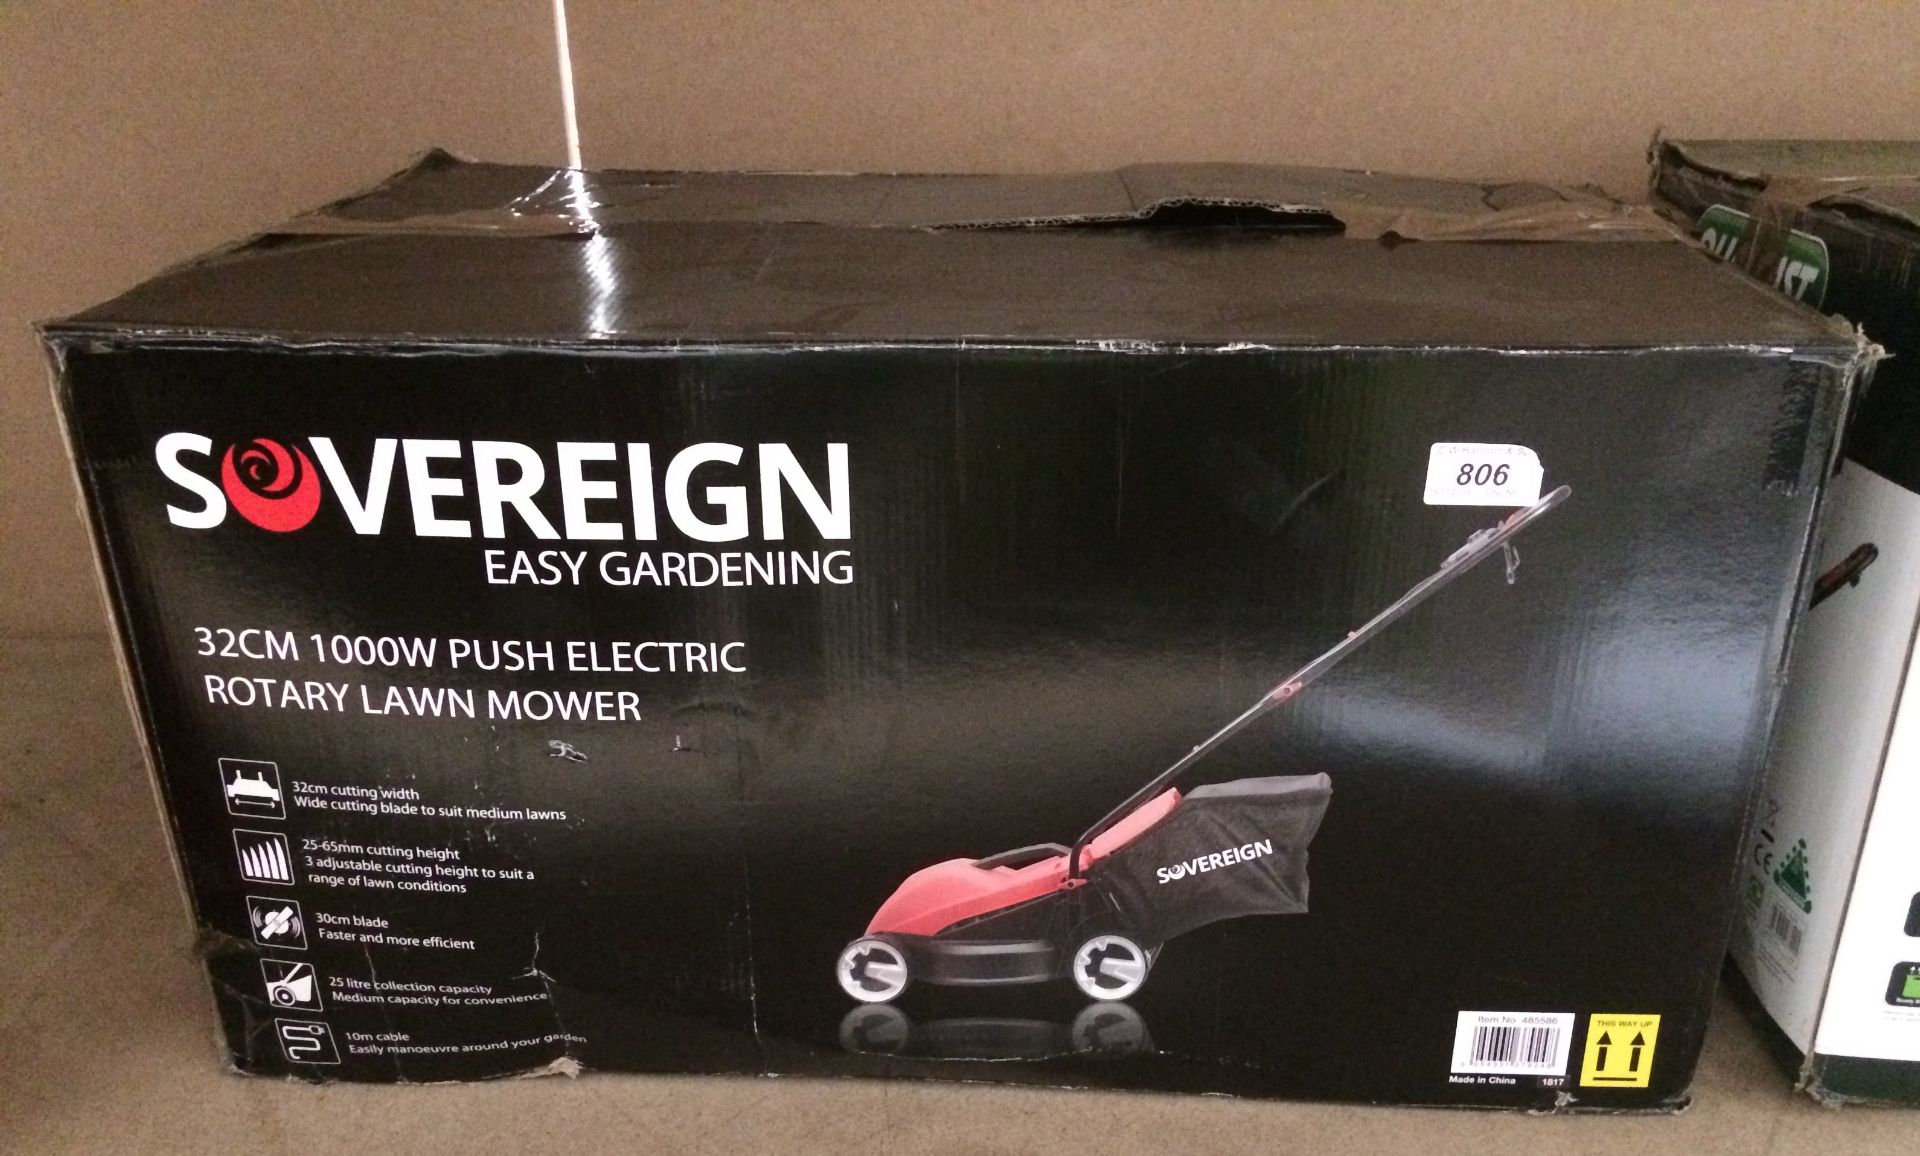 A Sovereign Easy Gardening 32cm 1000w push electric rotary lawn mower - boxed (seconds/returns)